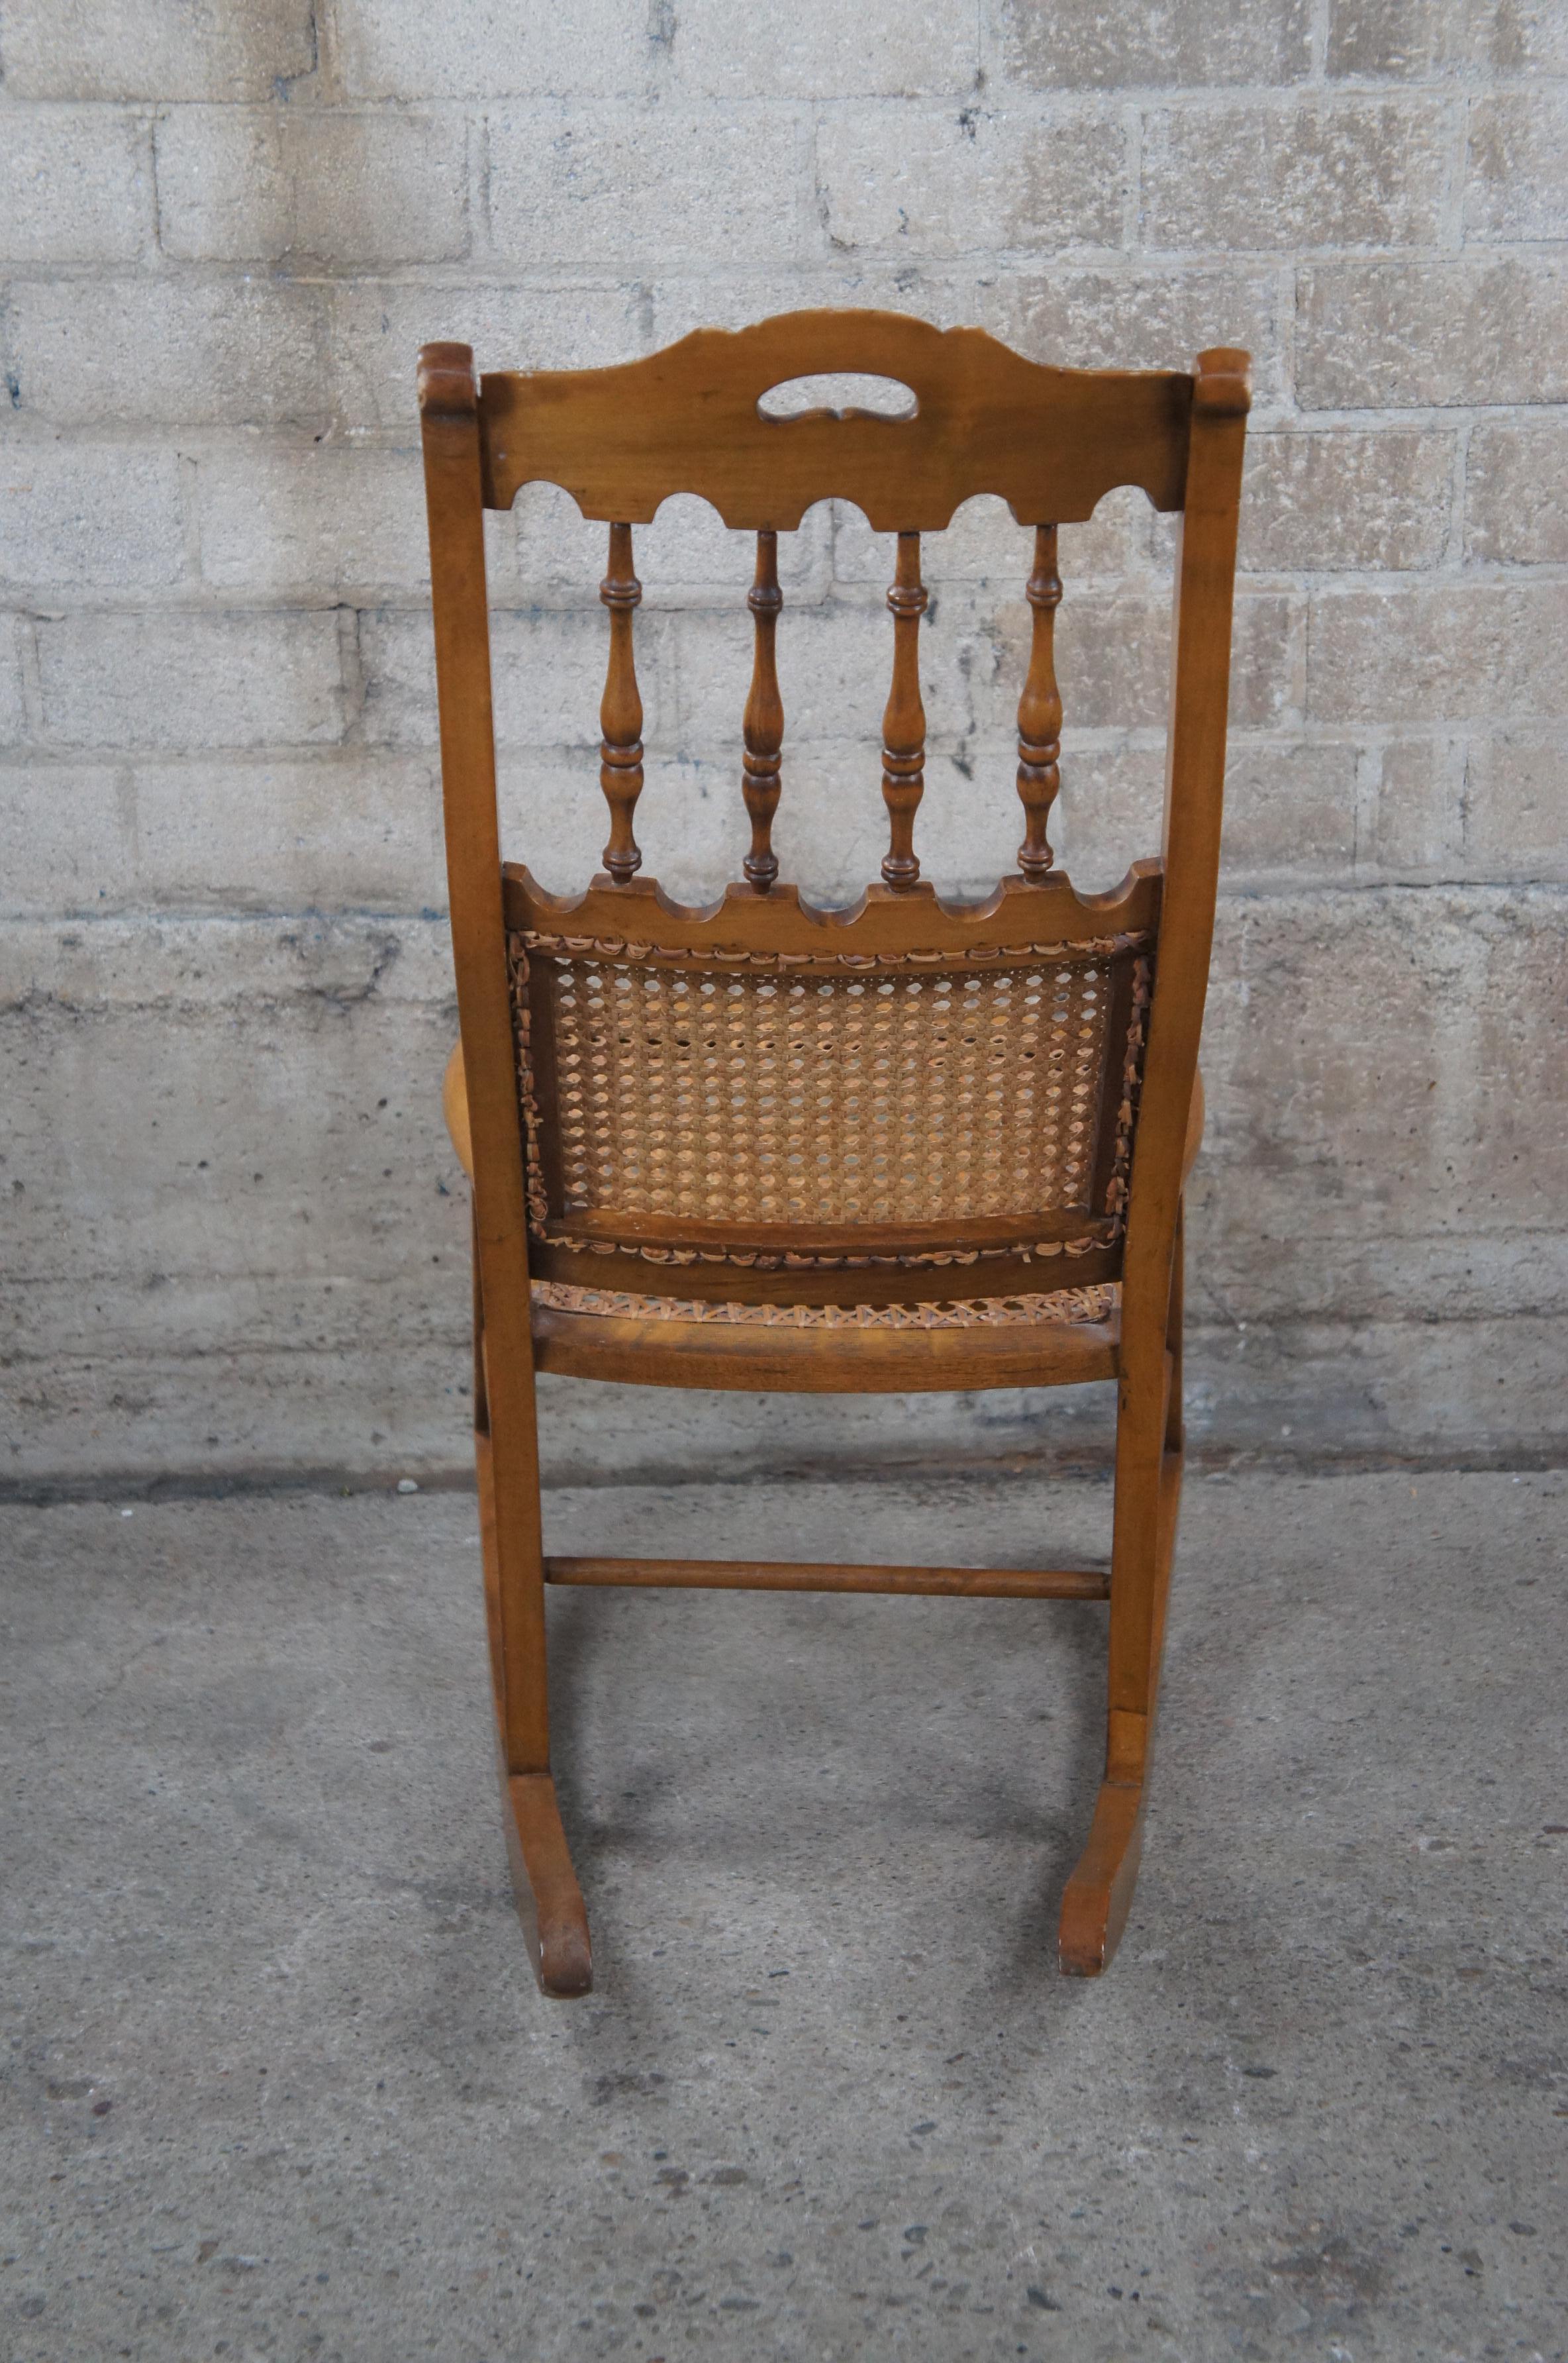 American Colonial Antique Early American Maple Spindle Back Rocking Chair Cane Seat Petite Rocker For Sale